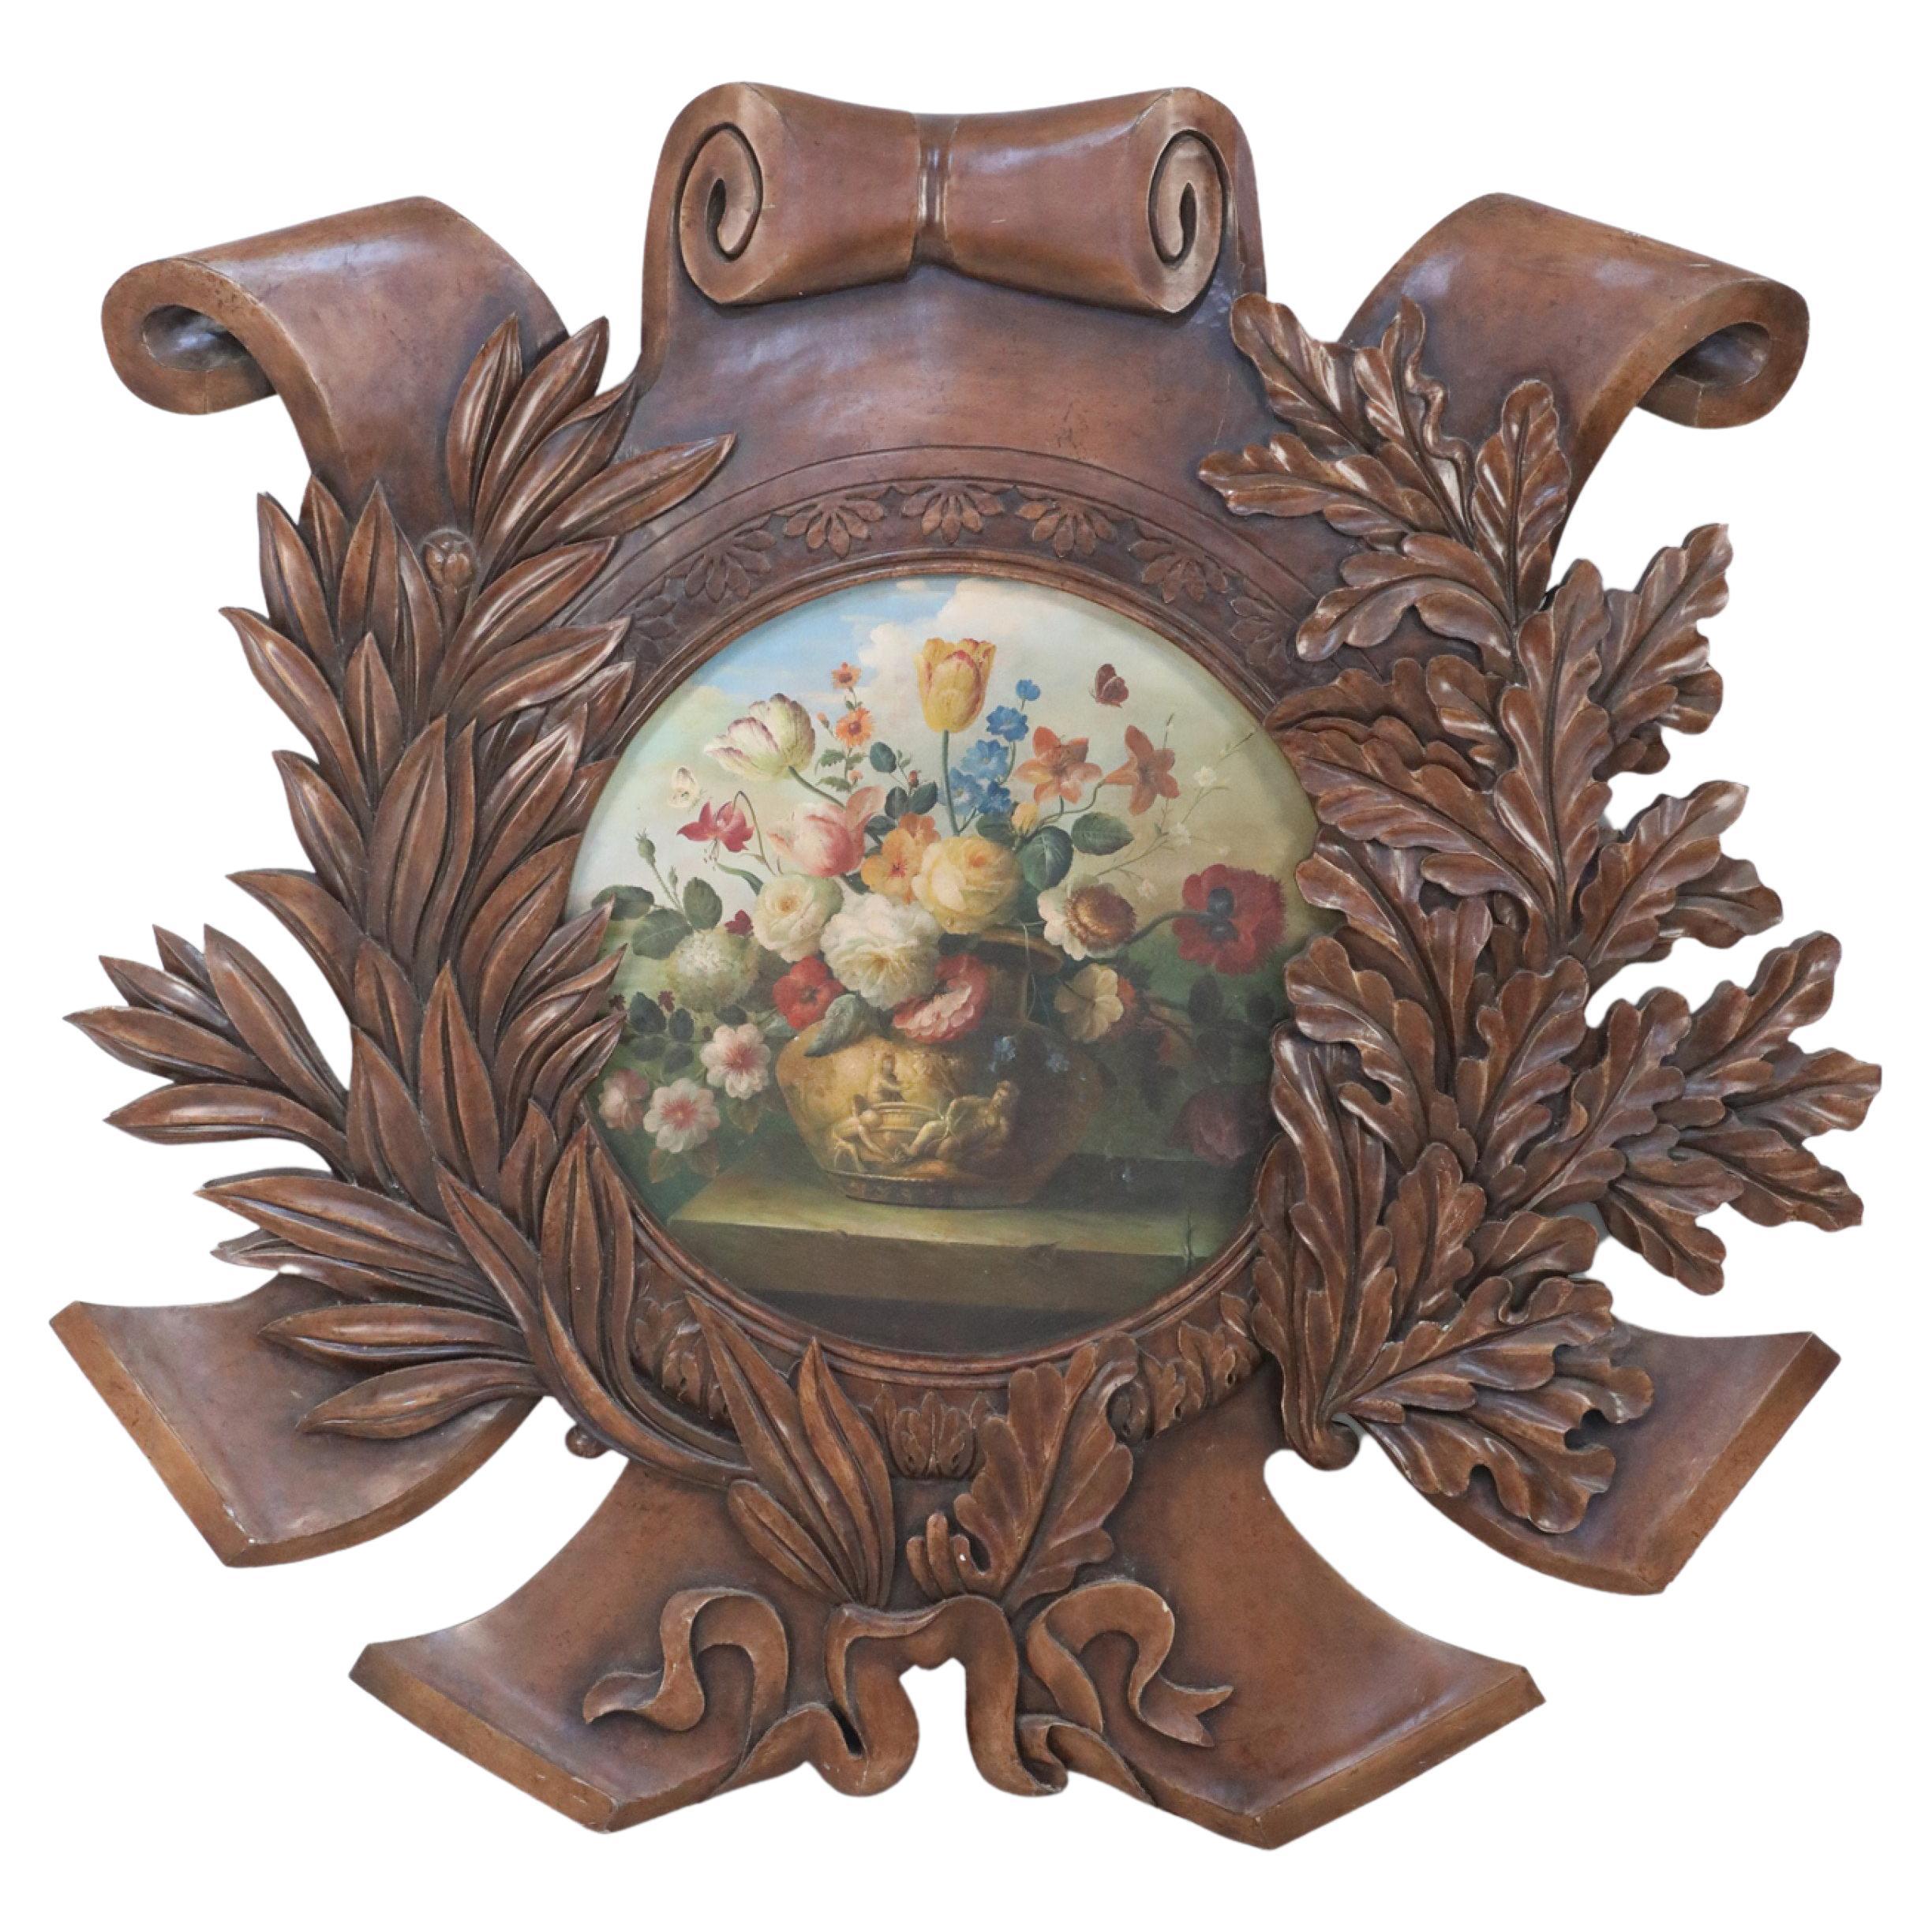 Wooden Wall Plaque with Painted Floral Still Life Inset For Sale